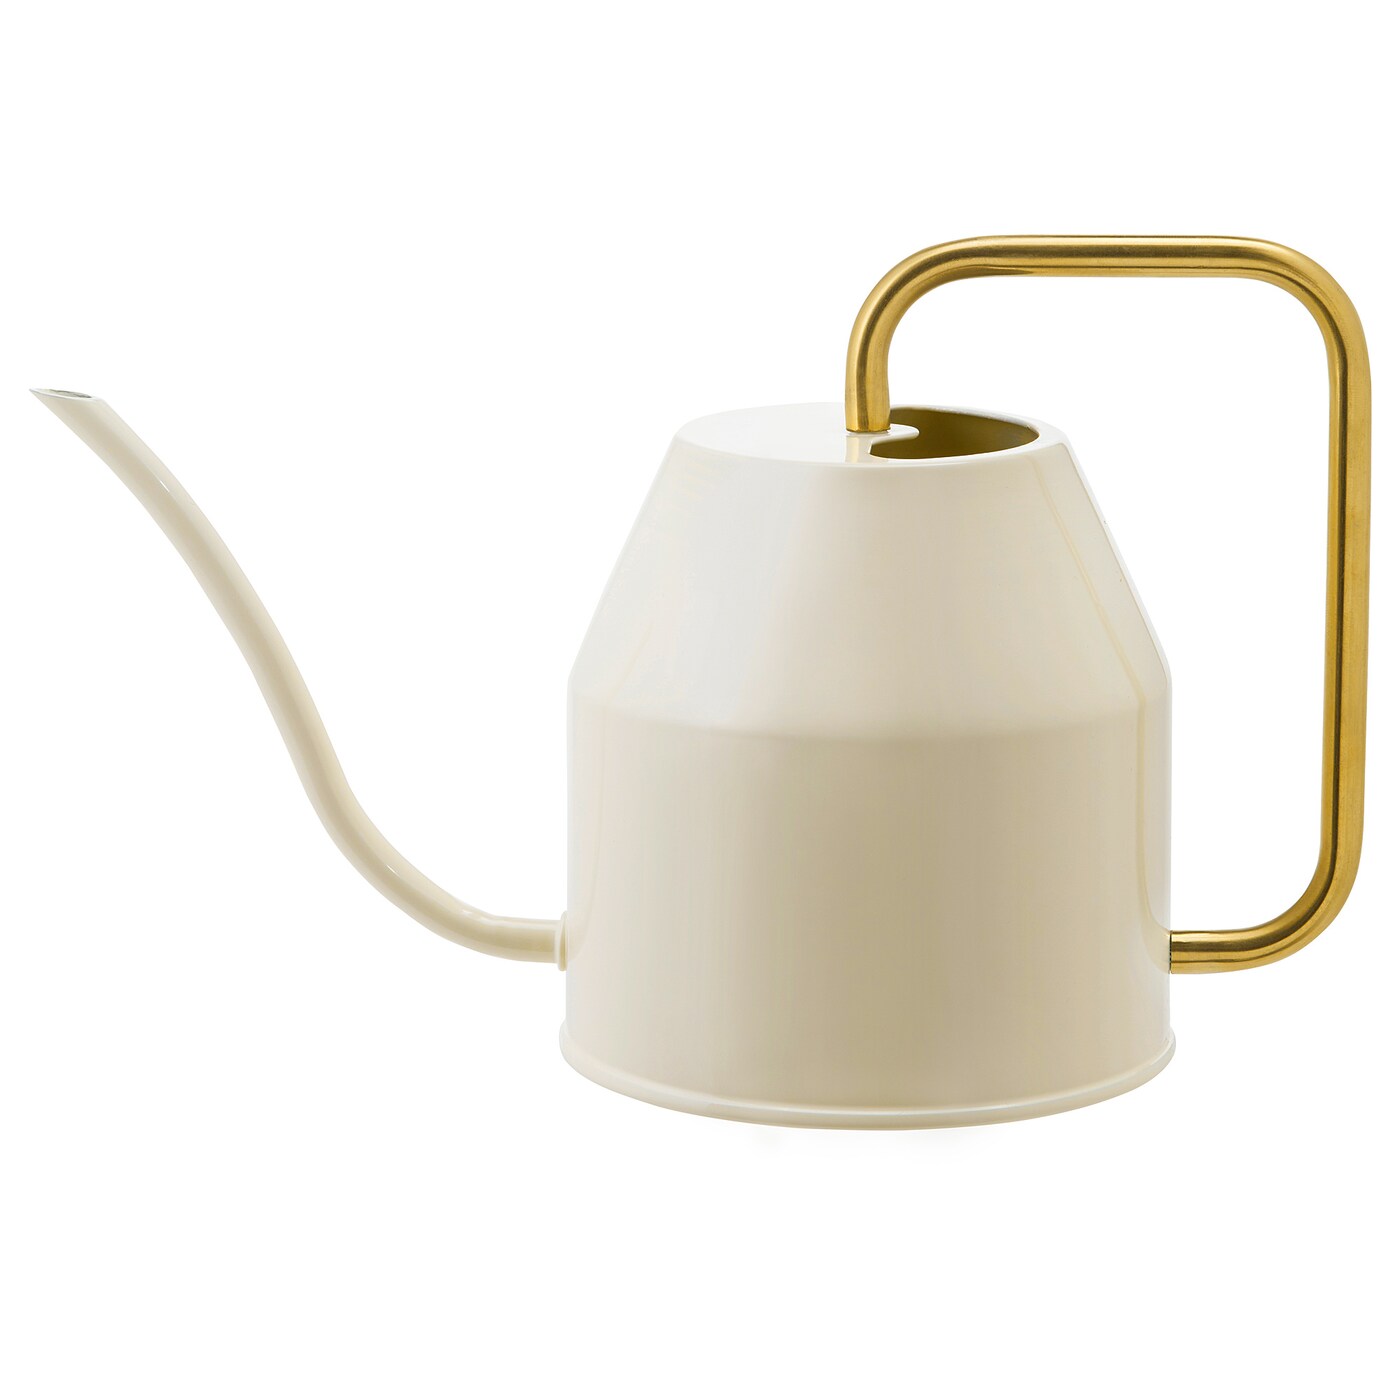 10 Aesthetically Pleasing House Décor Items Under ¥1000 - Watering can